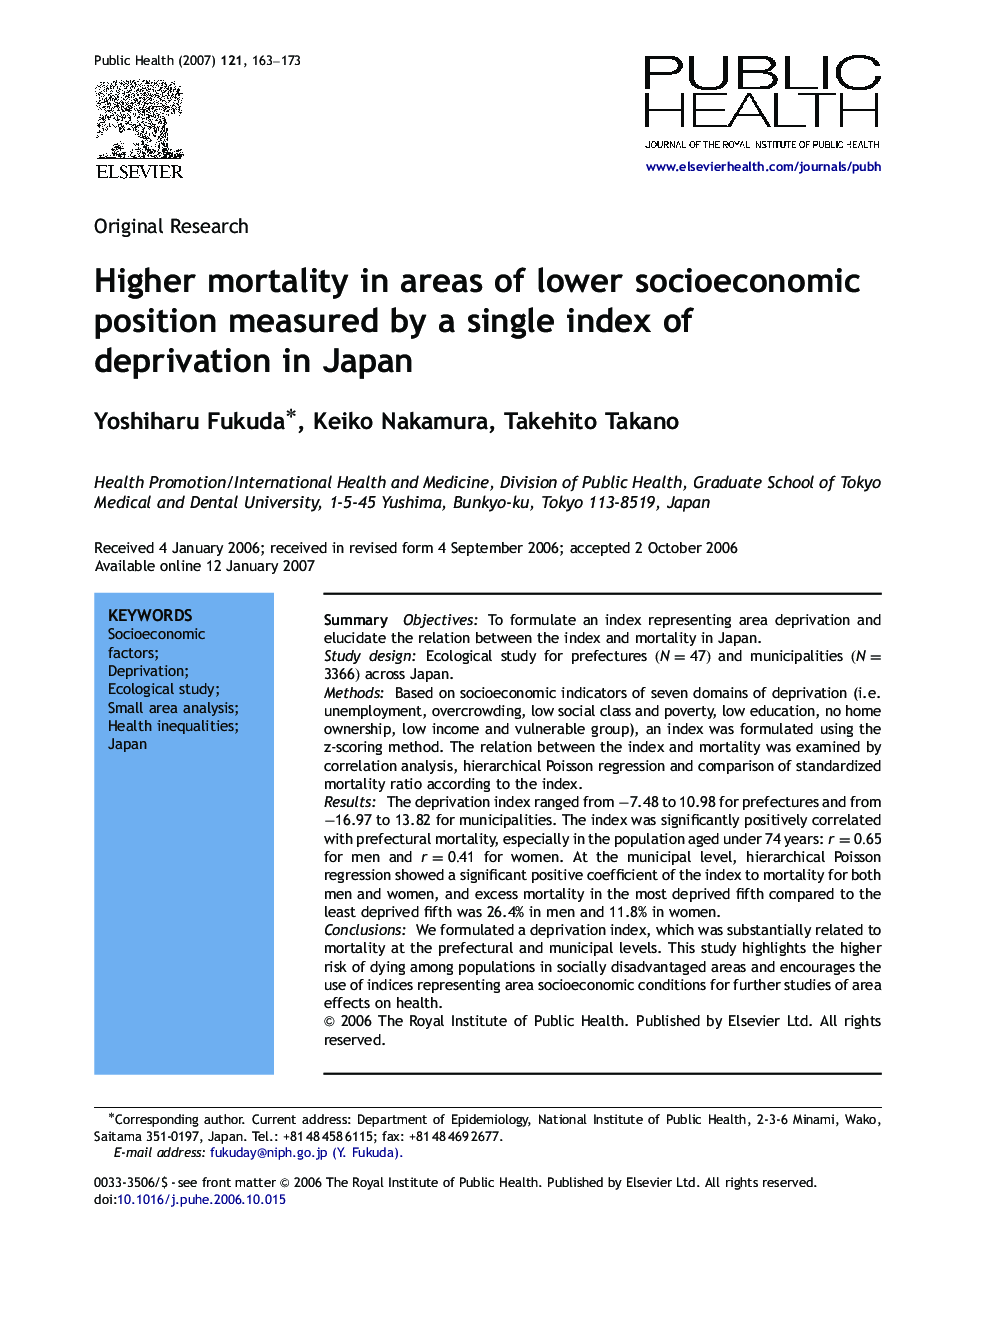 Higher mortality in areas of lower socioeconomic position measured by a single index of deprivation in Japan